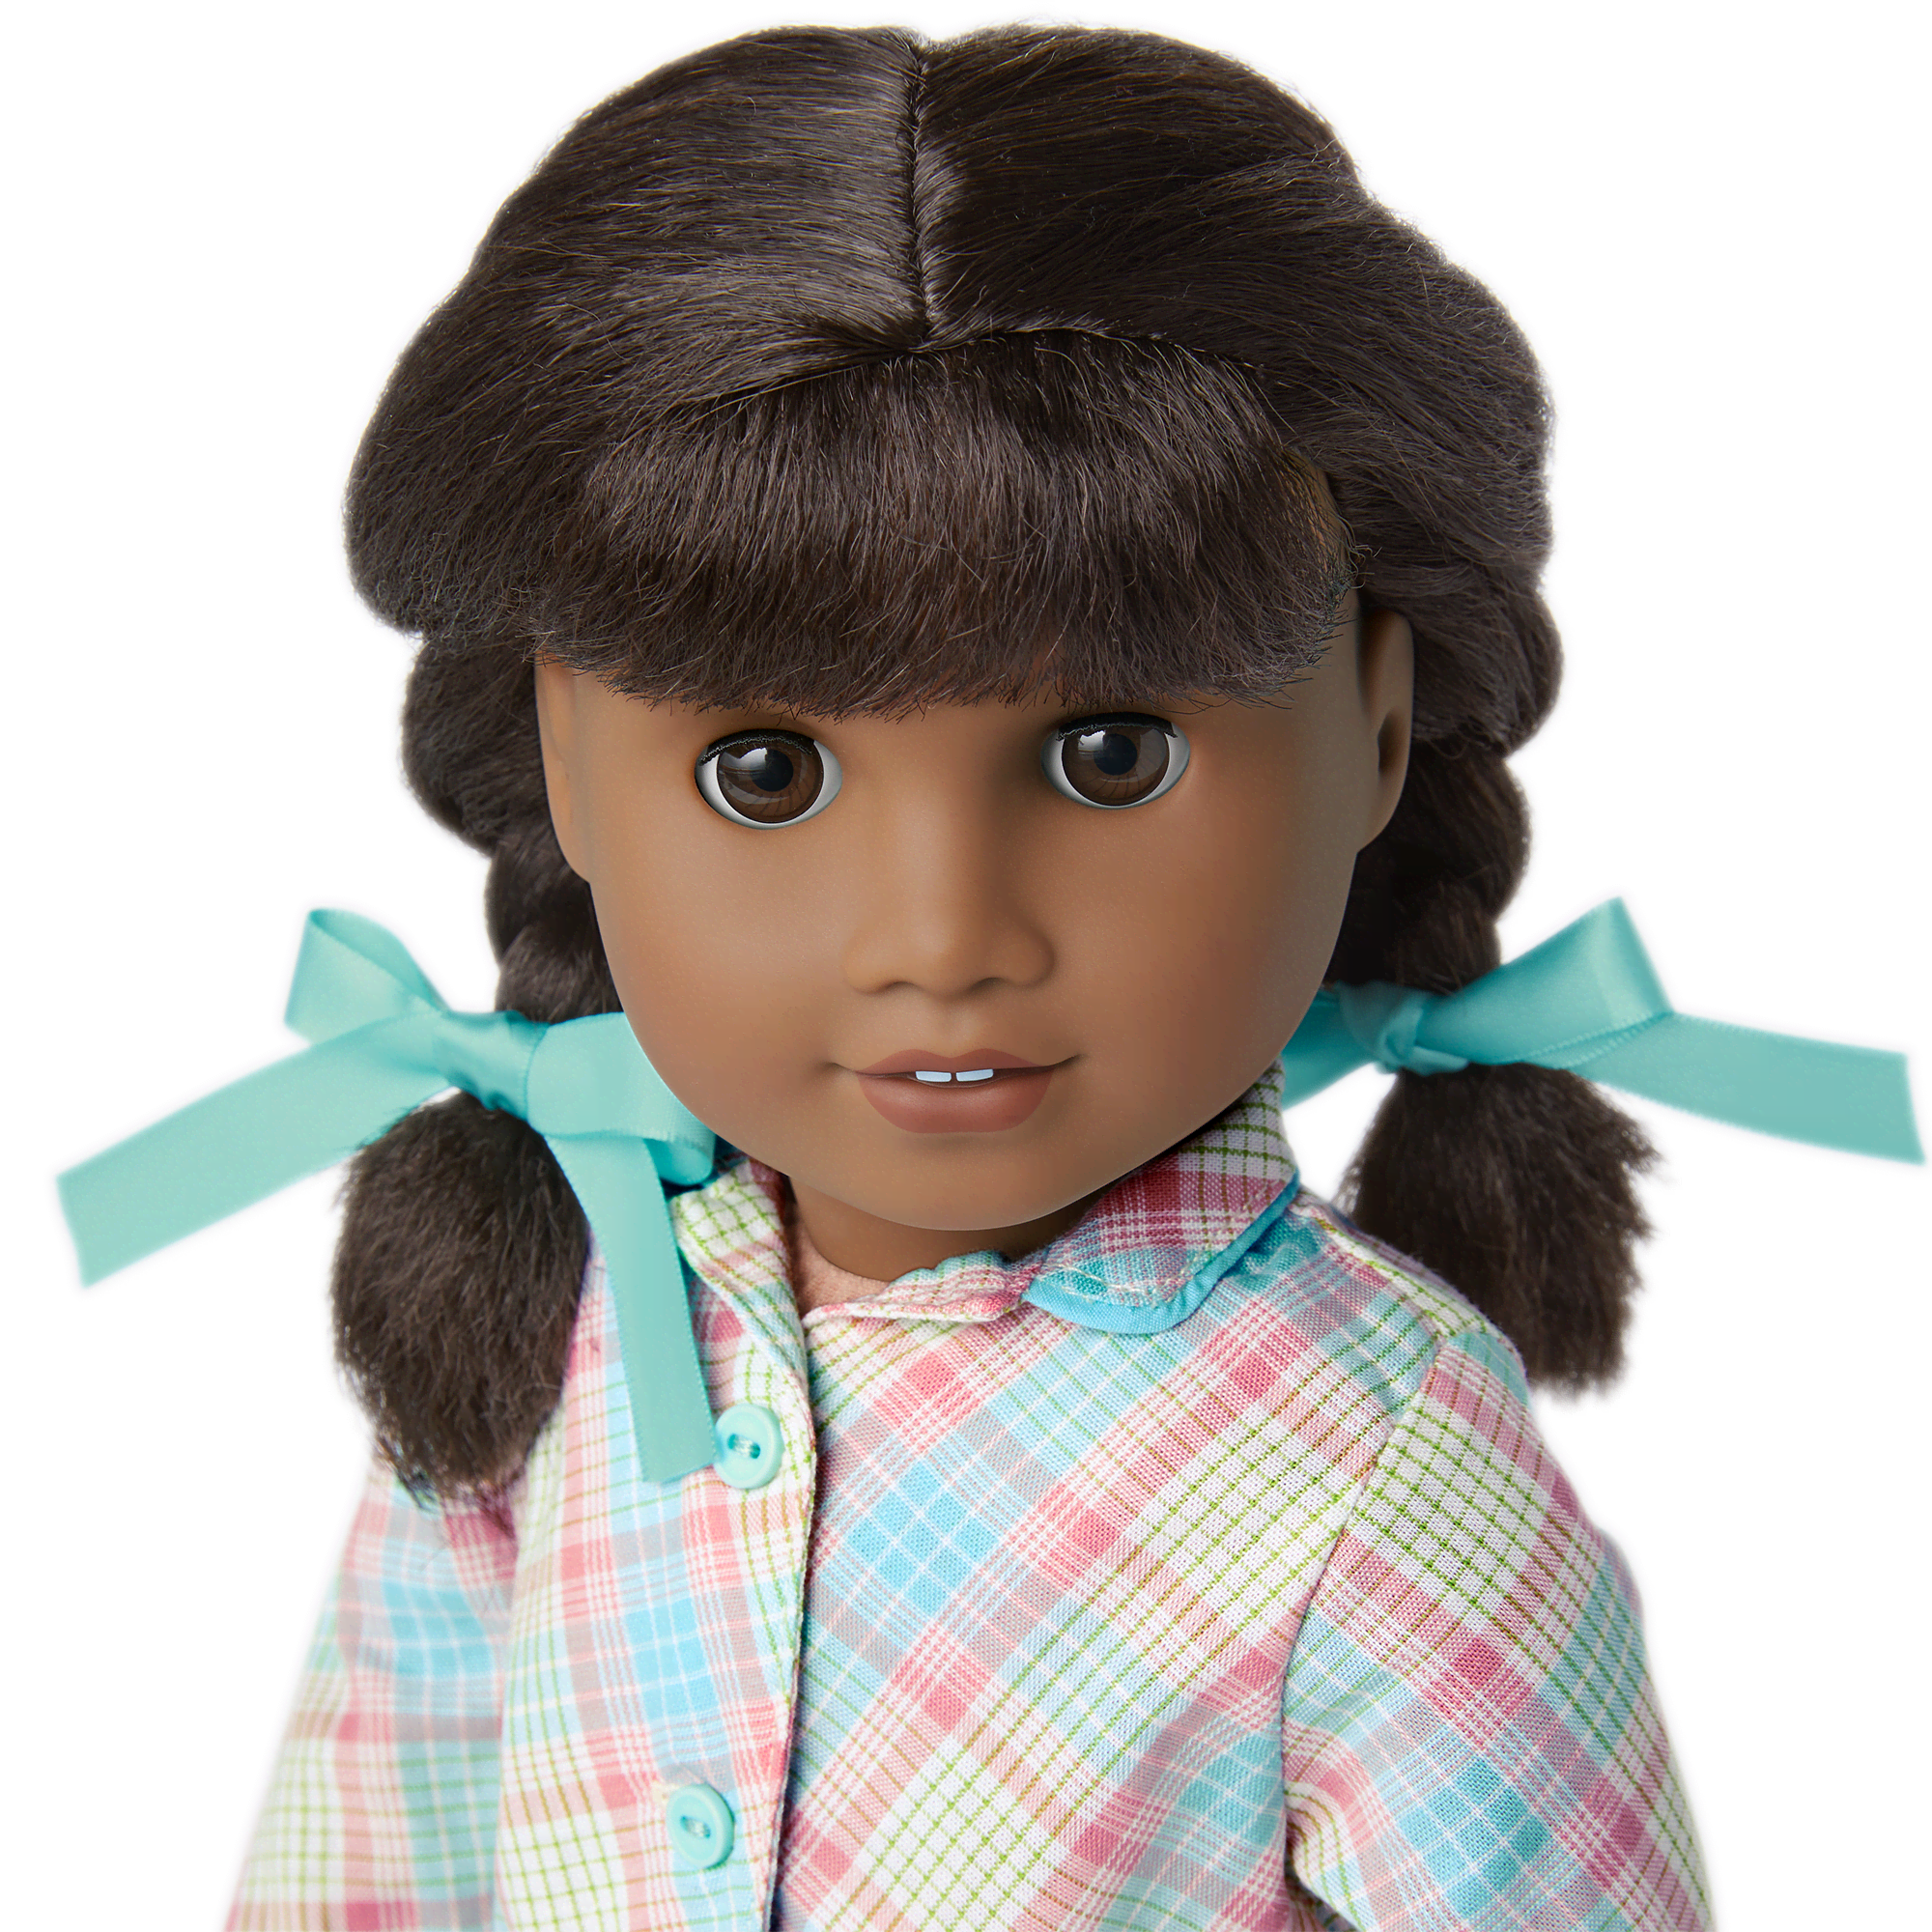 Melody’s™ Plaid Pajamas for 18-inch Dolls